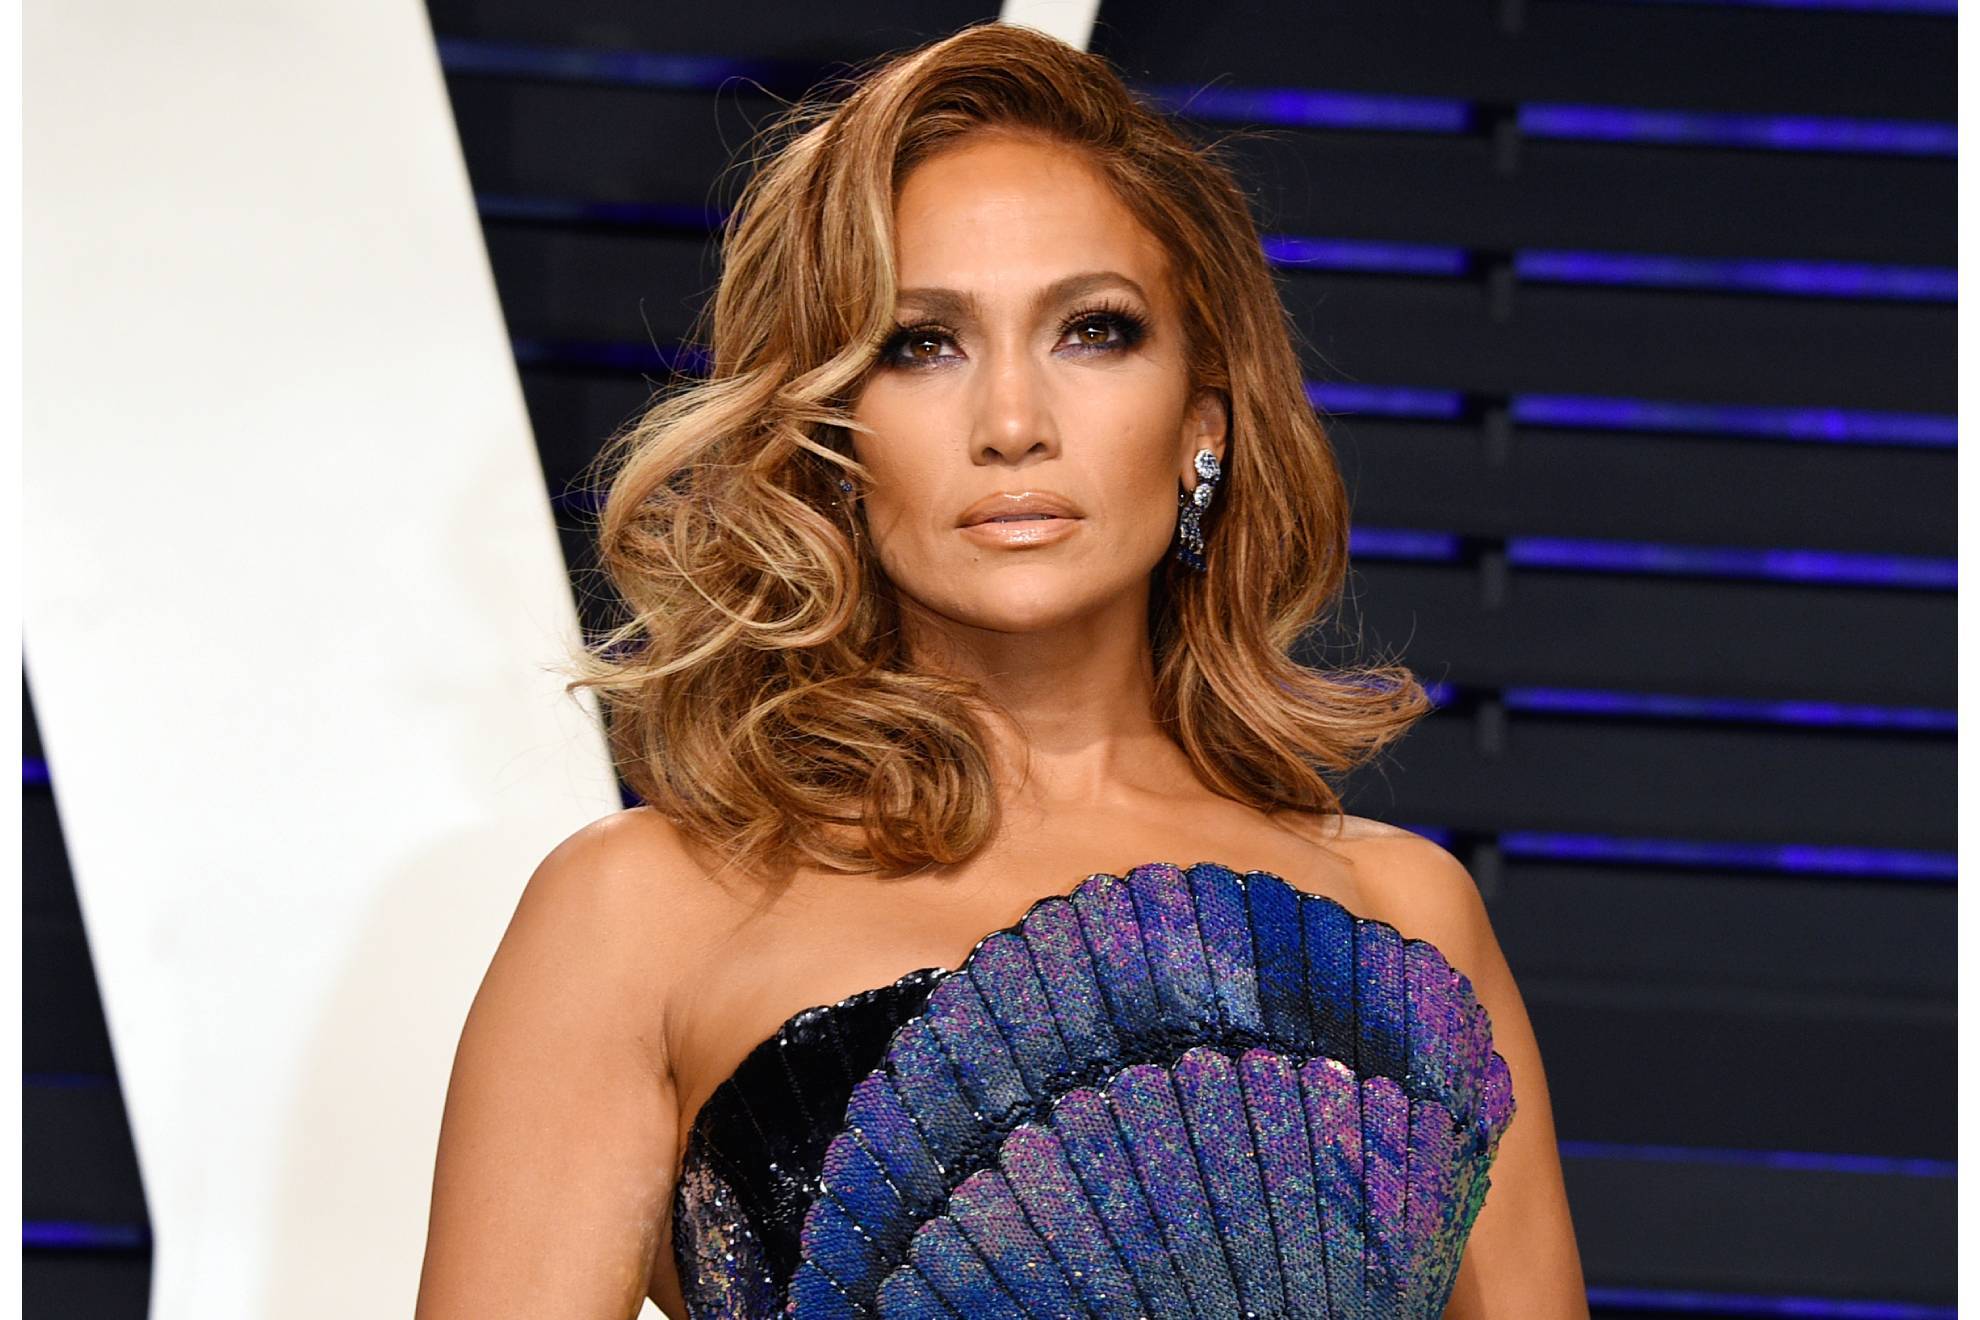 Jennifer Lopez sexier than ever: flashes lacy underwear during fashion show